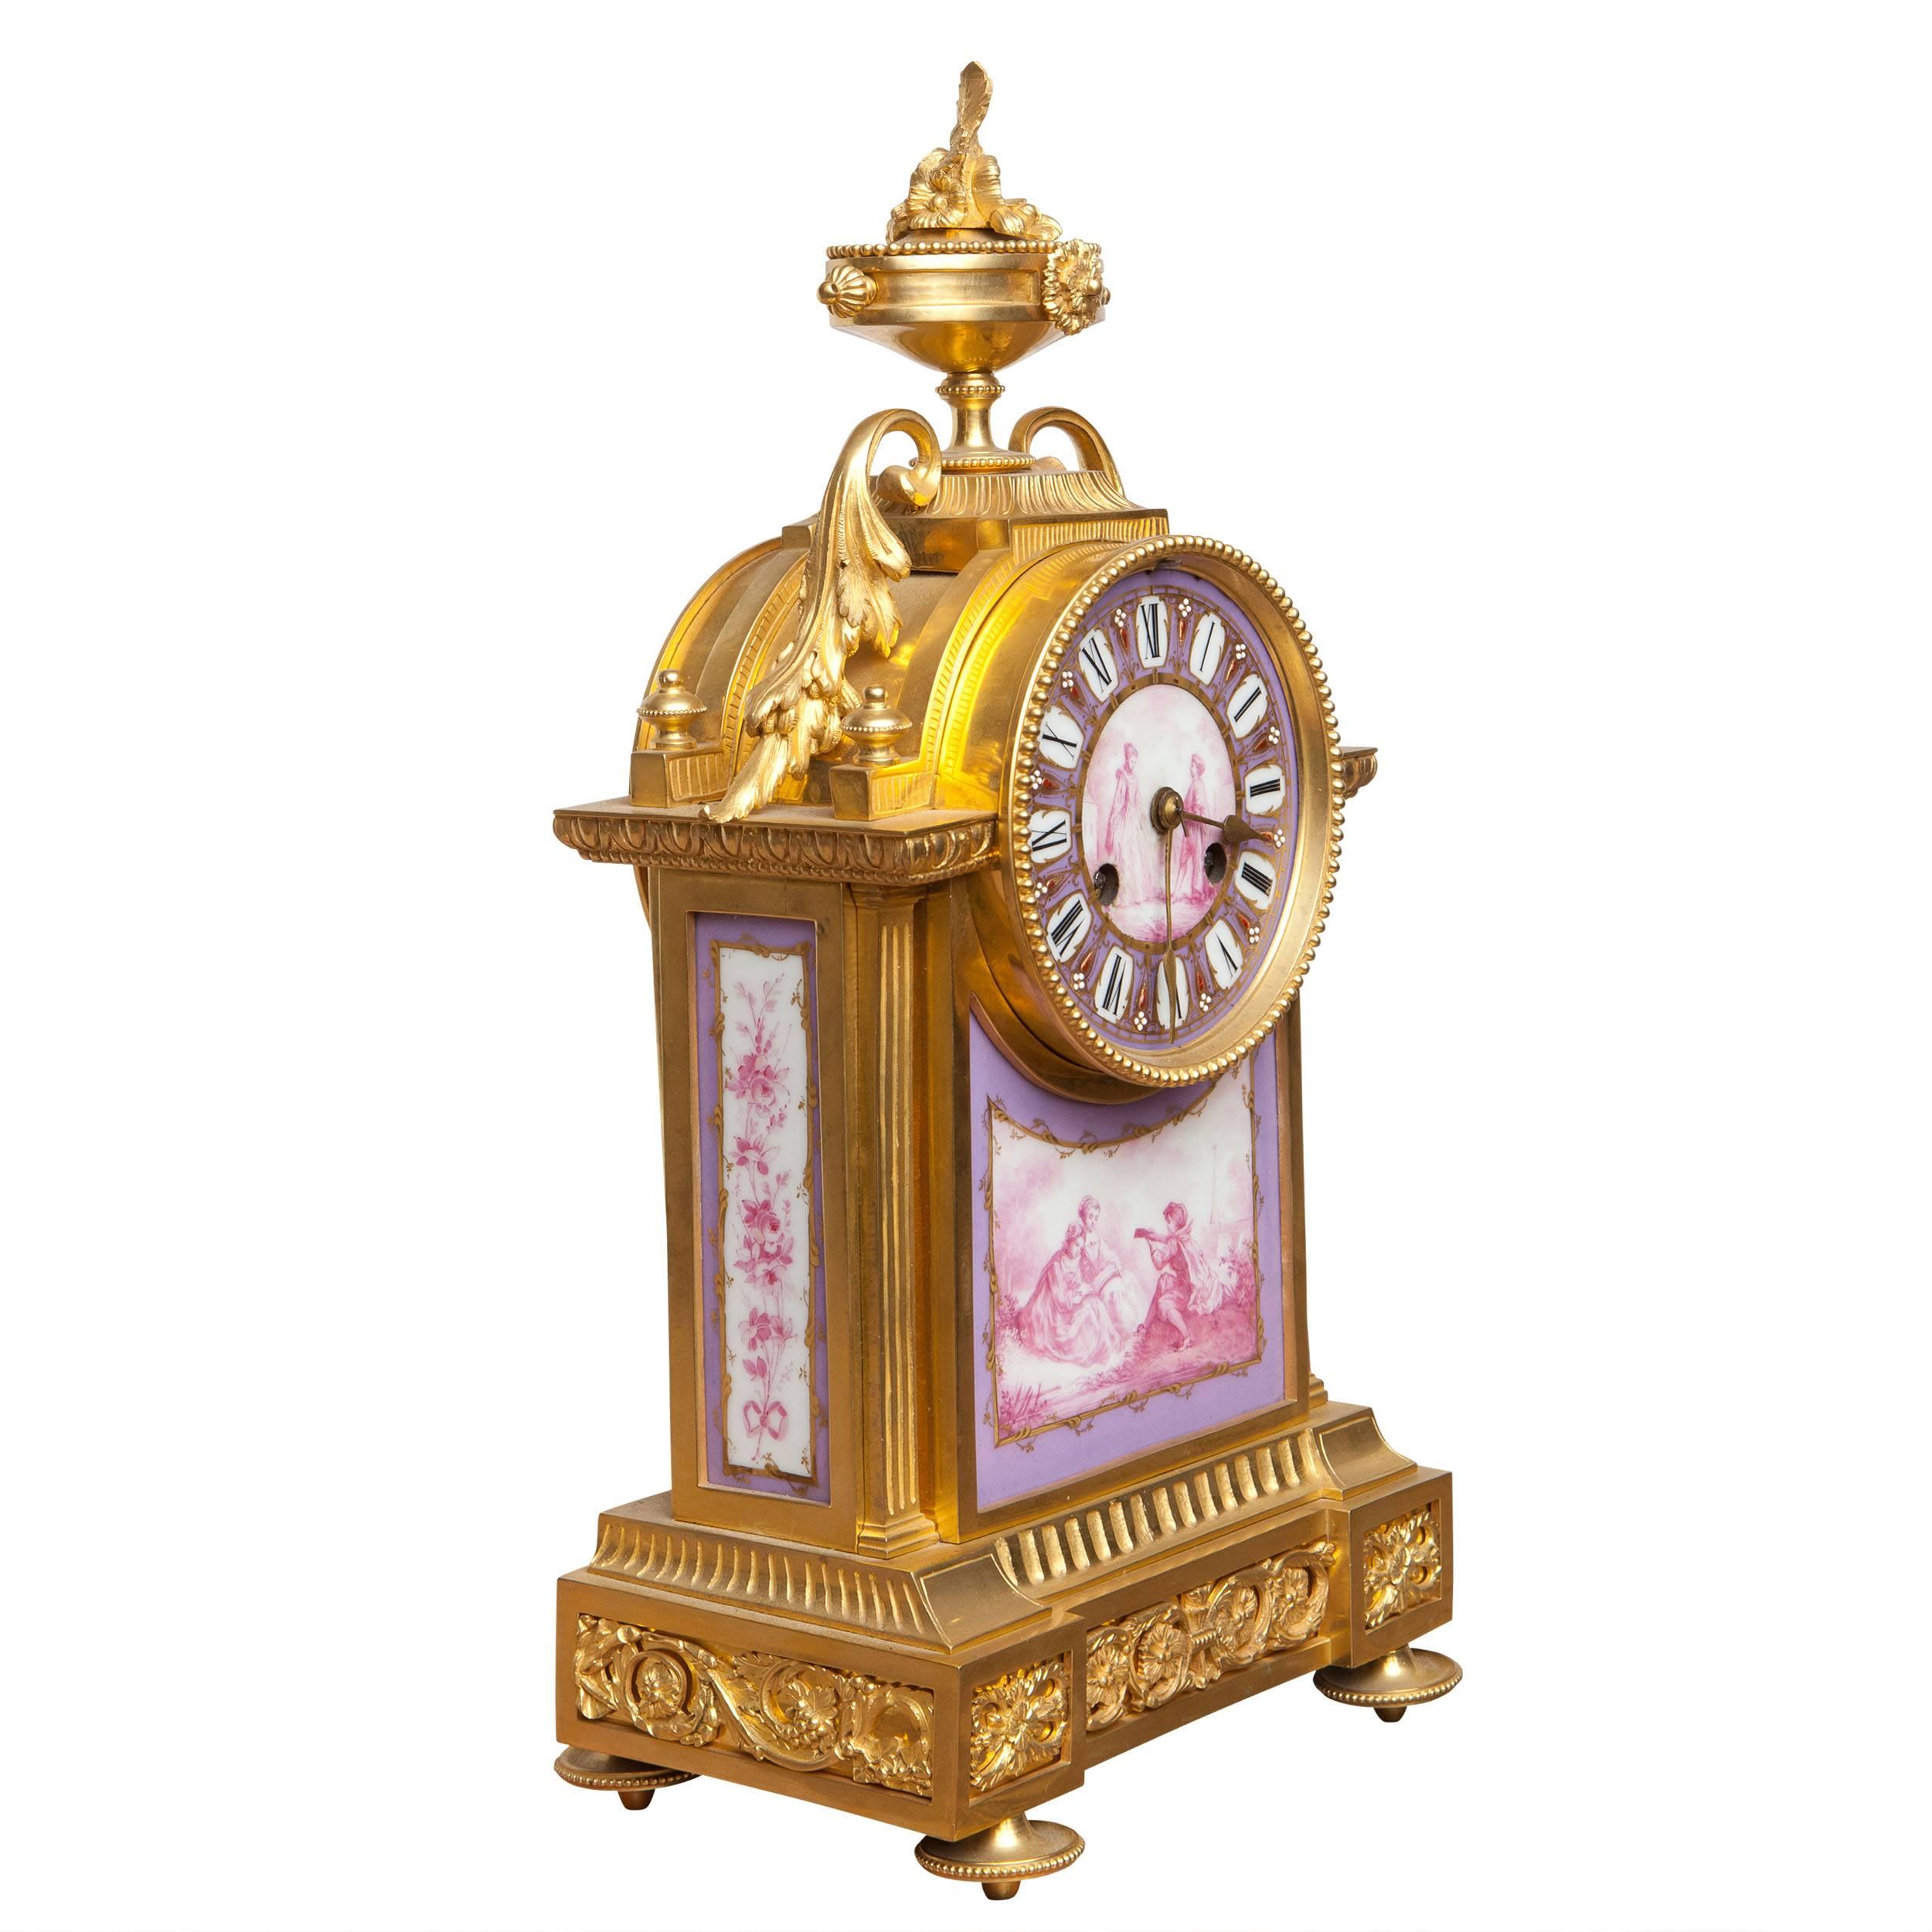 France, circa 1880.

The ormolu case mounted with fine painted porcelain scenes of a courting couple. This unusual mauve color pallet emphasizes the quality and cleanliness of the clock.

Strikes every half hour and hour. 

Measures: Height